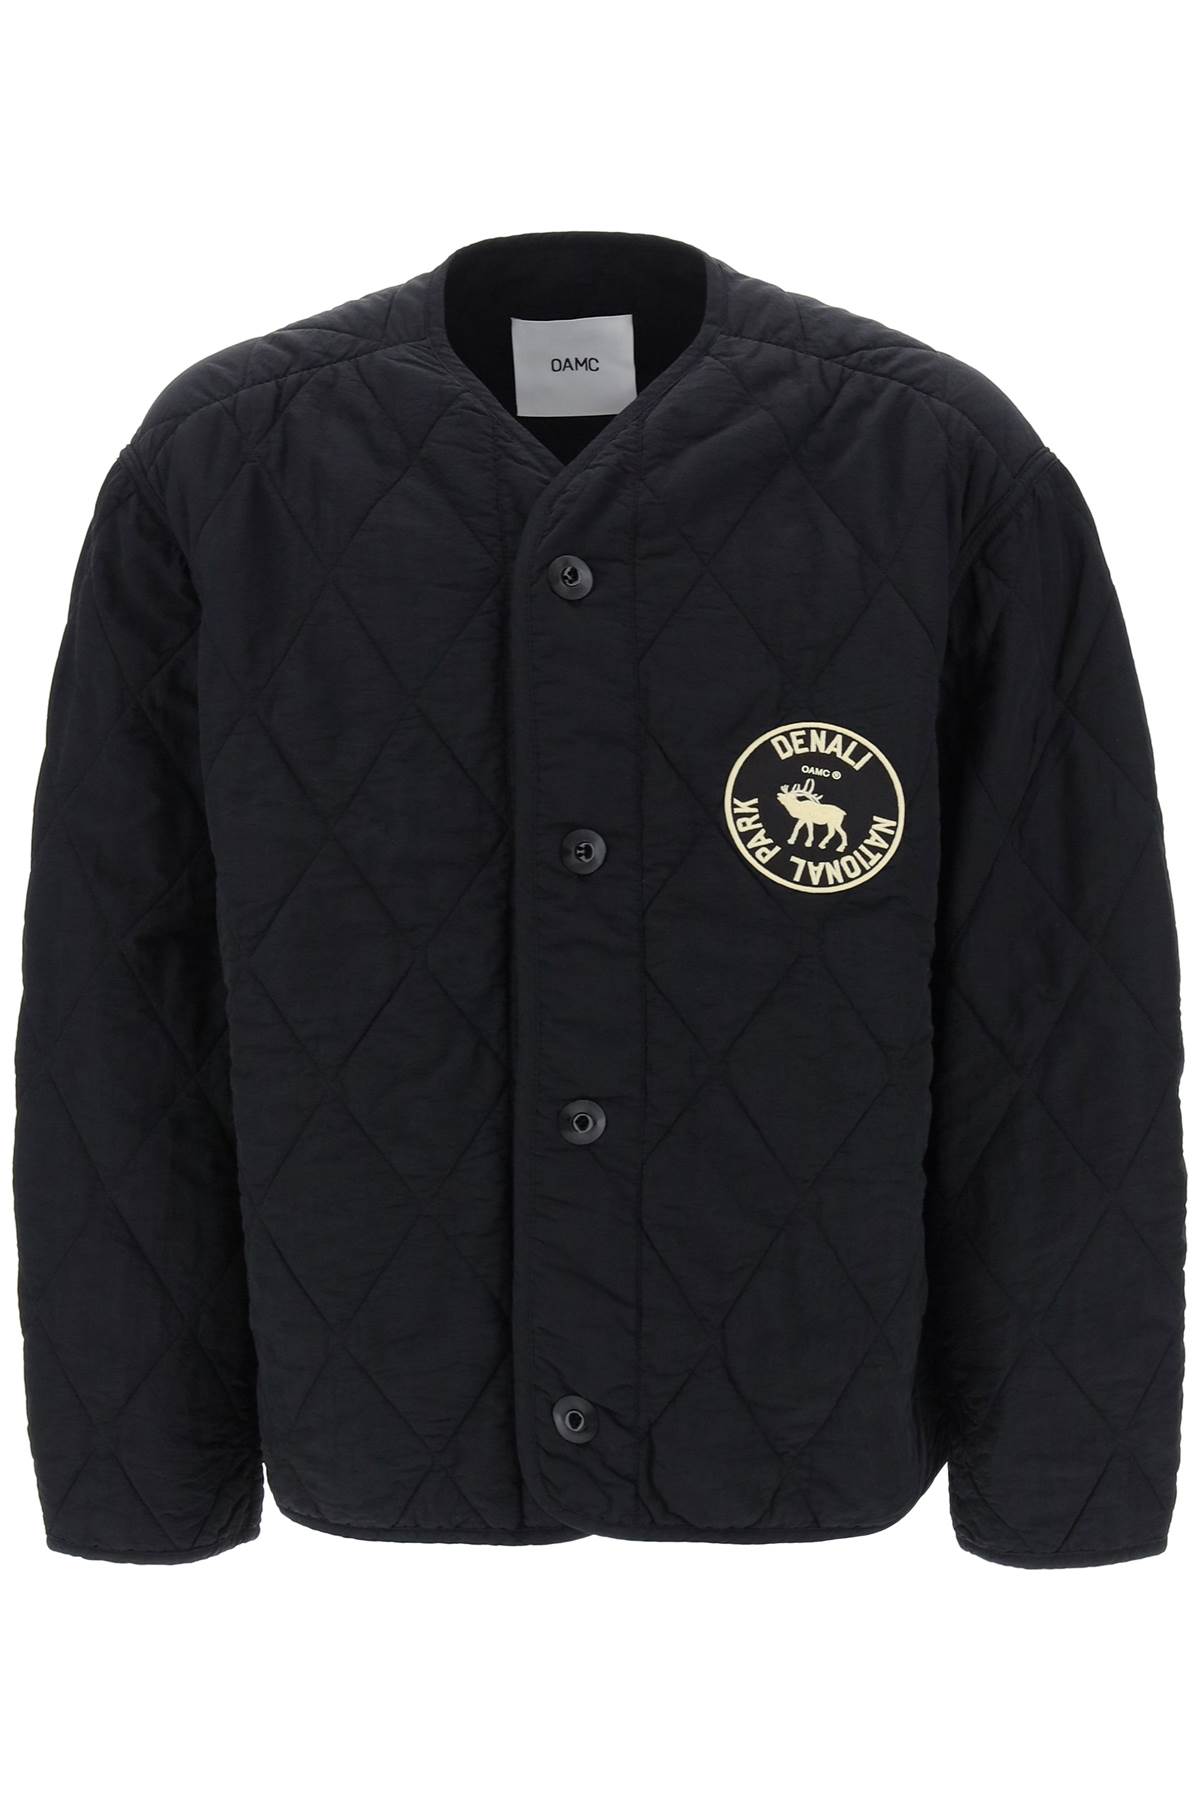 OAMC DENALI QUILTED JACKET WITH PRINT AND EMBROIDERY AT BACK